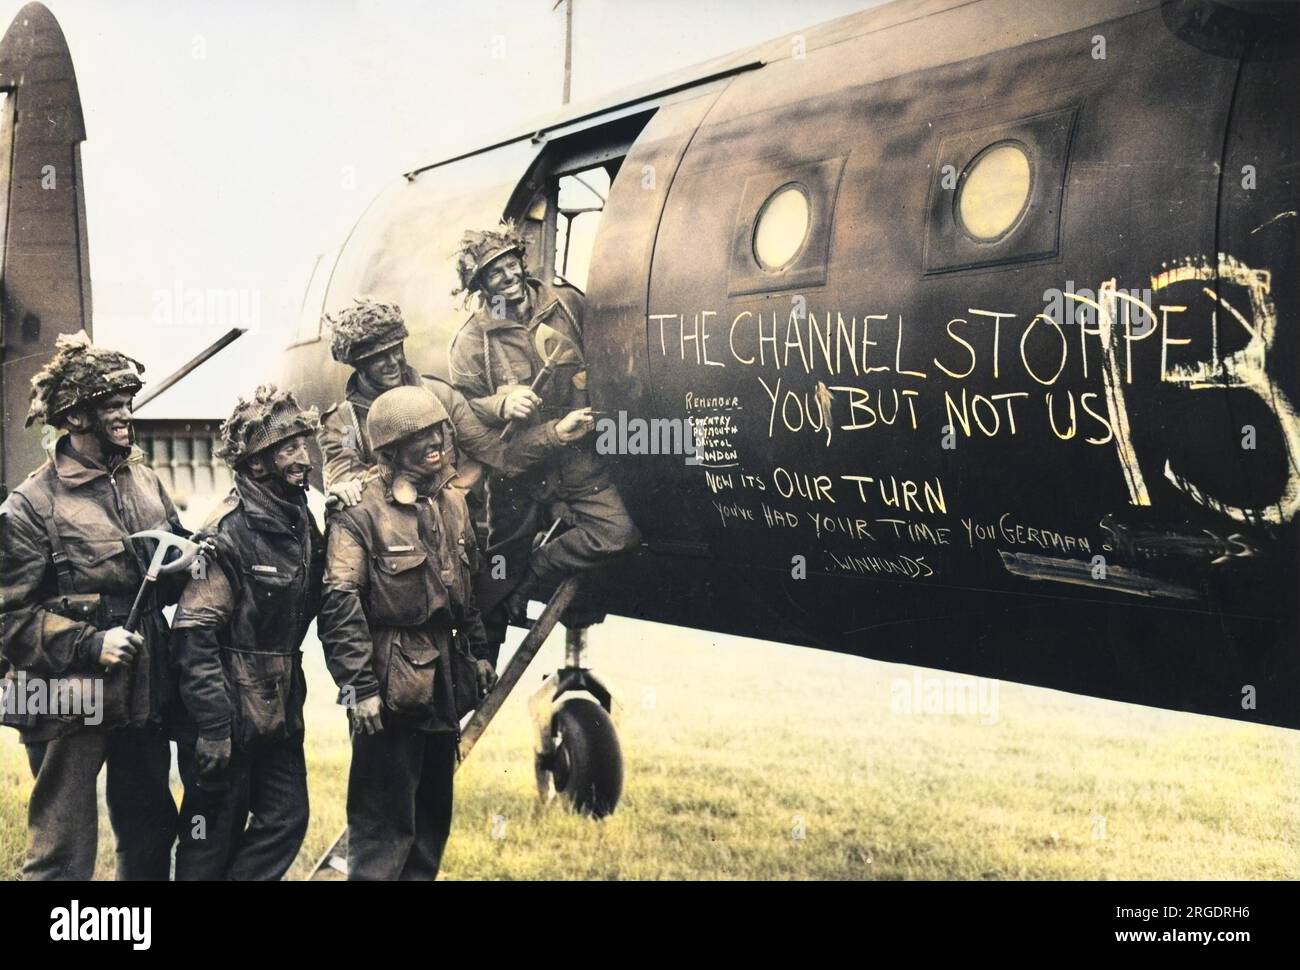 A team of paratroopers on 7 June 1944 amuse themselves whilst awaiting the call to take flight in their glider (an Airspeed Horsa) to back up the initial assault phase on the Normandy coast. The chalk slogan reads: 'The Channel stopped you, but not us - now it's our turn. You've had your time you German Schweinhunds'!  D-Day began on 6 June 1944 at 6:30am and was conducted in two assault phases û the air assault landing of allied troops followed by an amphibious assault by infantry. The Normandy landings were the largest single-day amphibious actions ever undertaken, involving close to 400,000 Stock Photo